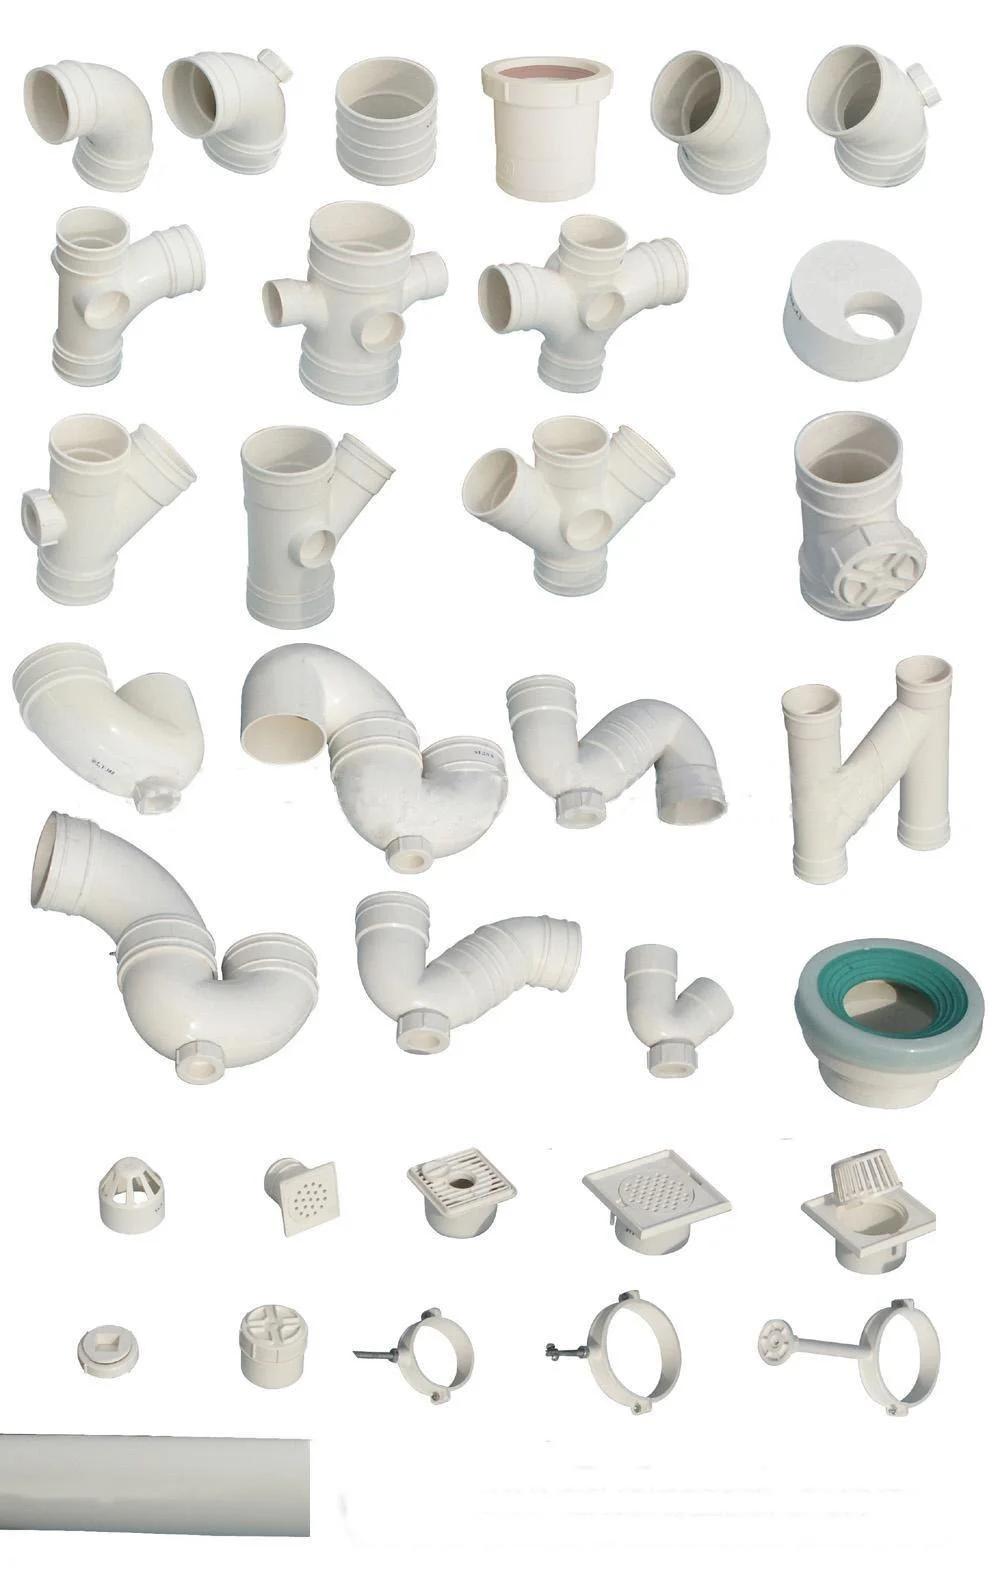 Plastic Mould for Straight Tee, Equal Tee, PVC Pipe Fittings